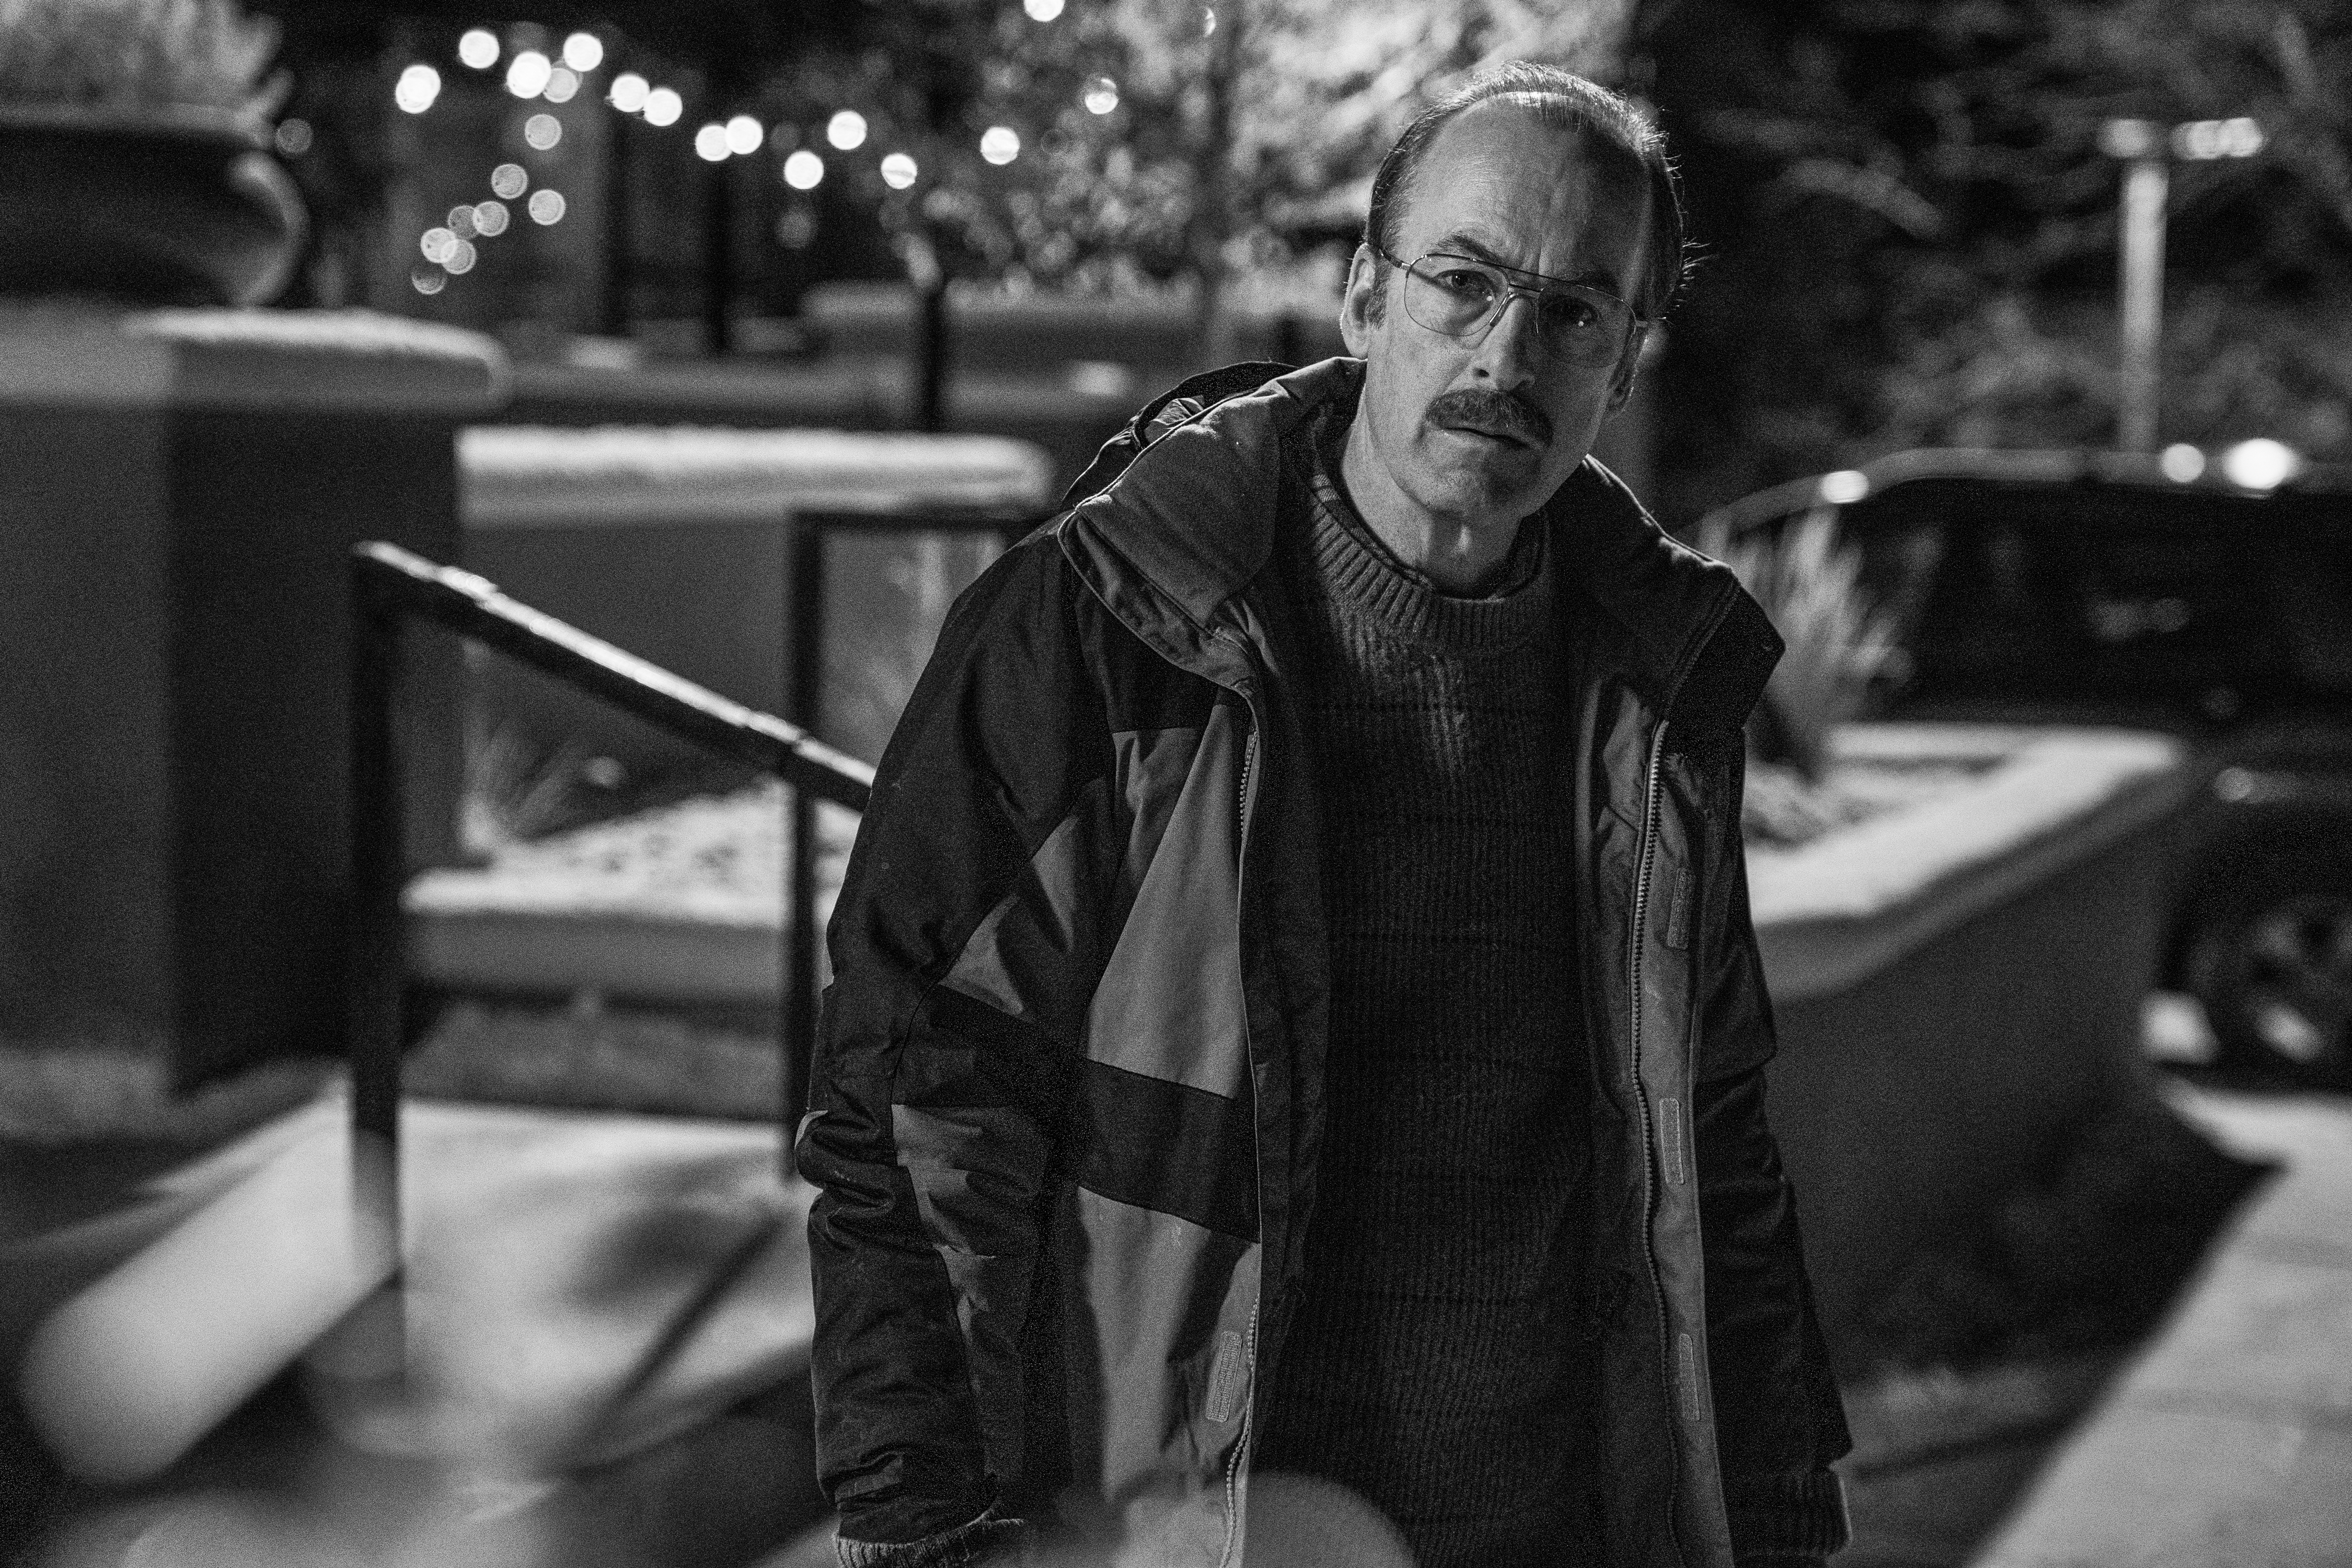 Bob Odenkirk as Gene Takovic in 'Better Call Saul' Season 6 Episode 11 on AMC. The image is in black and white, he's wearing a jacket, and he's tilting his head at someone off-screen.